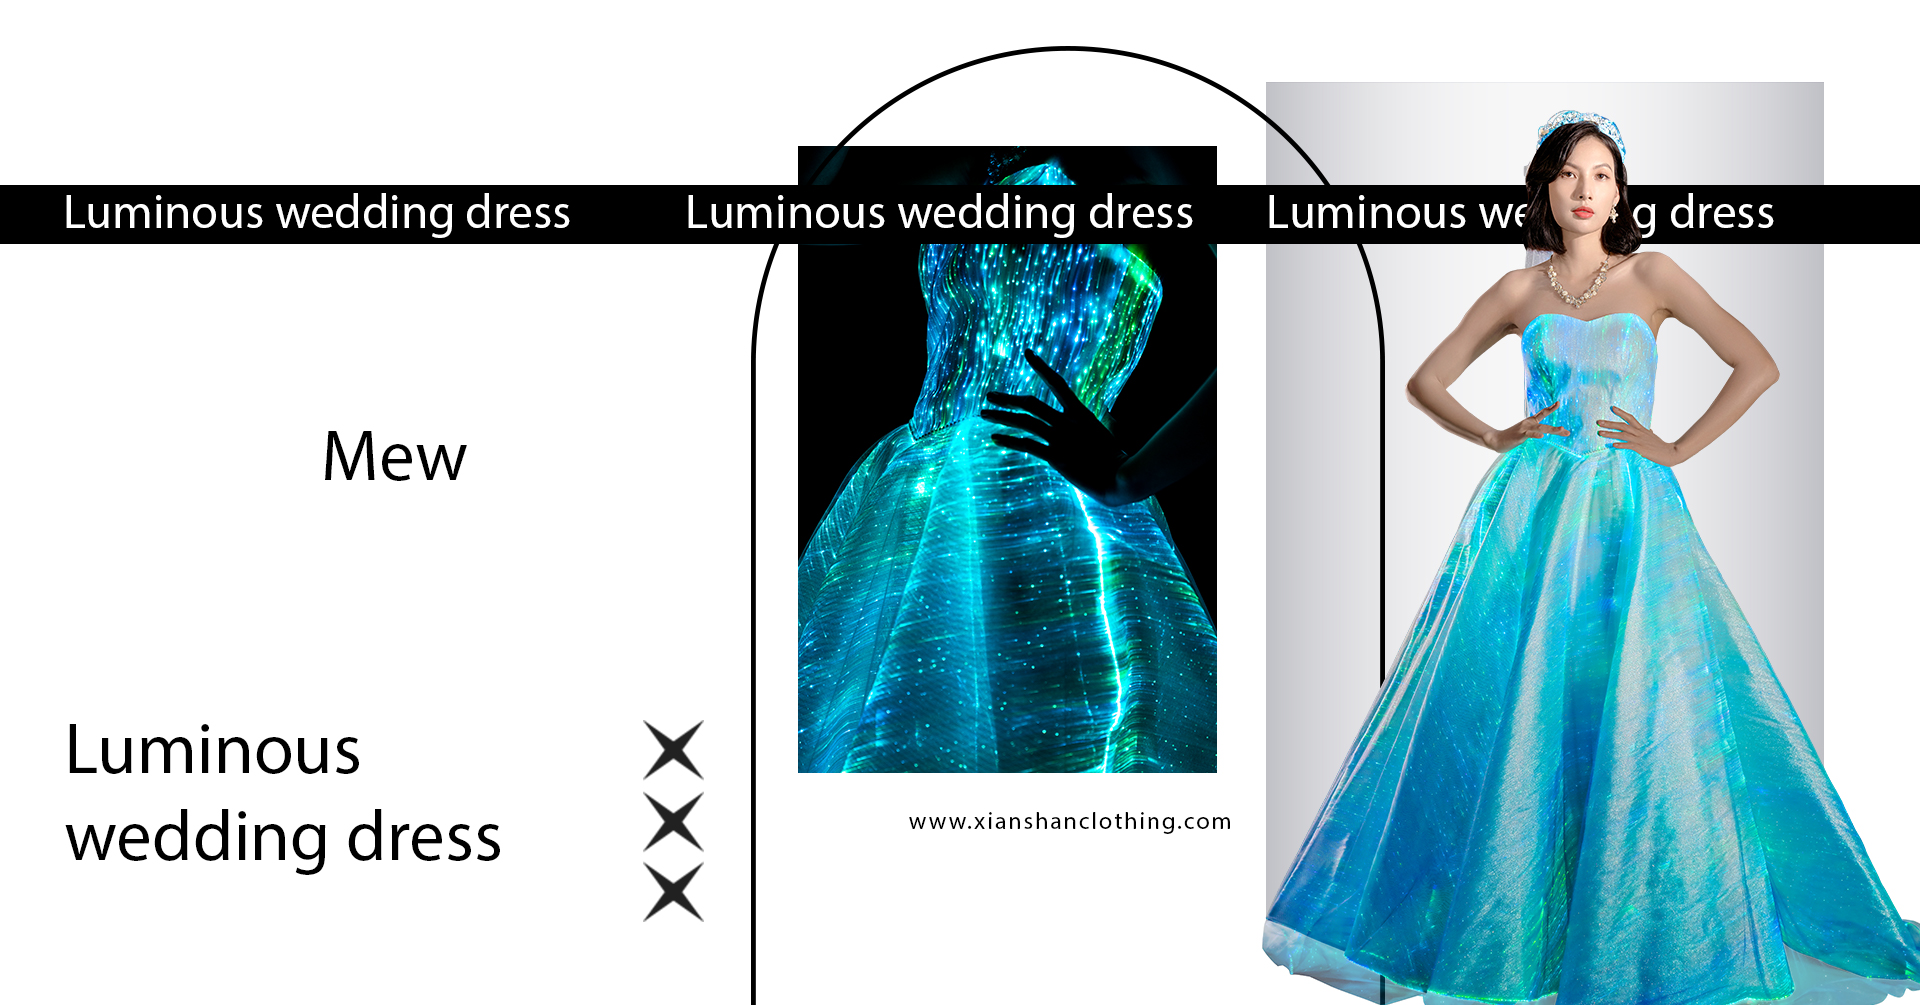 Have you seen the lumius wedding dress before?